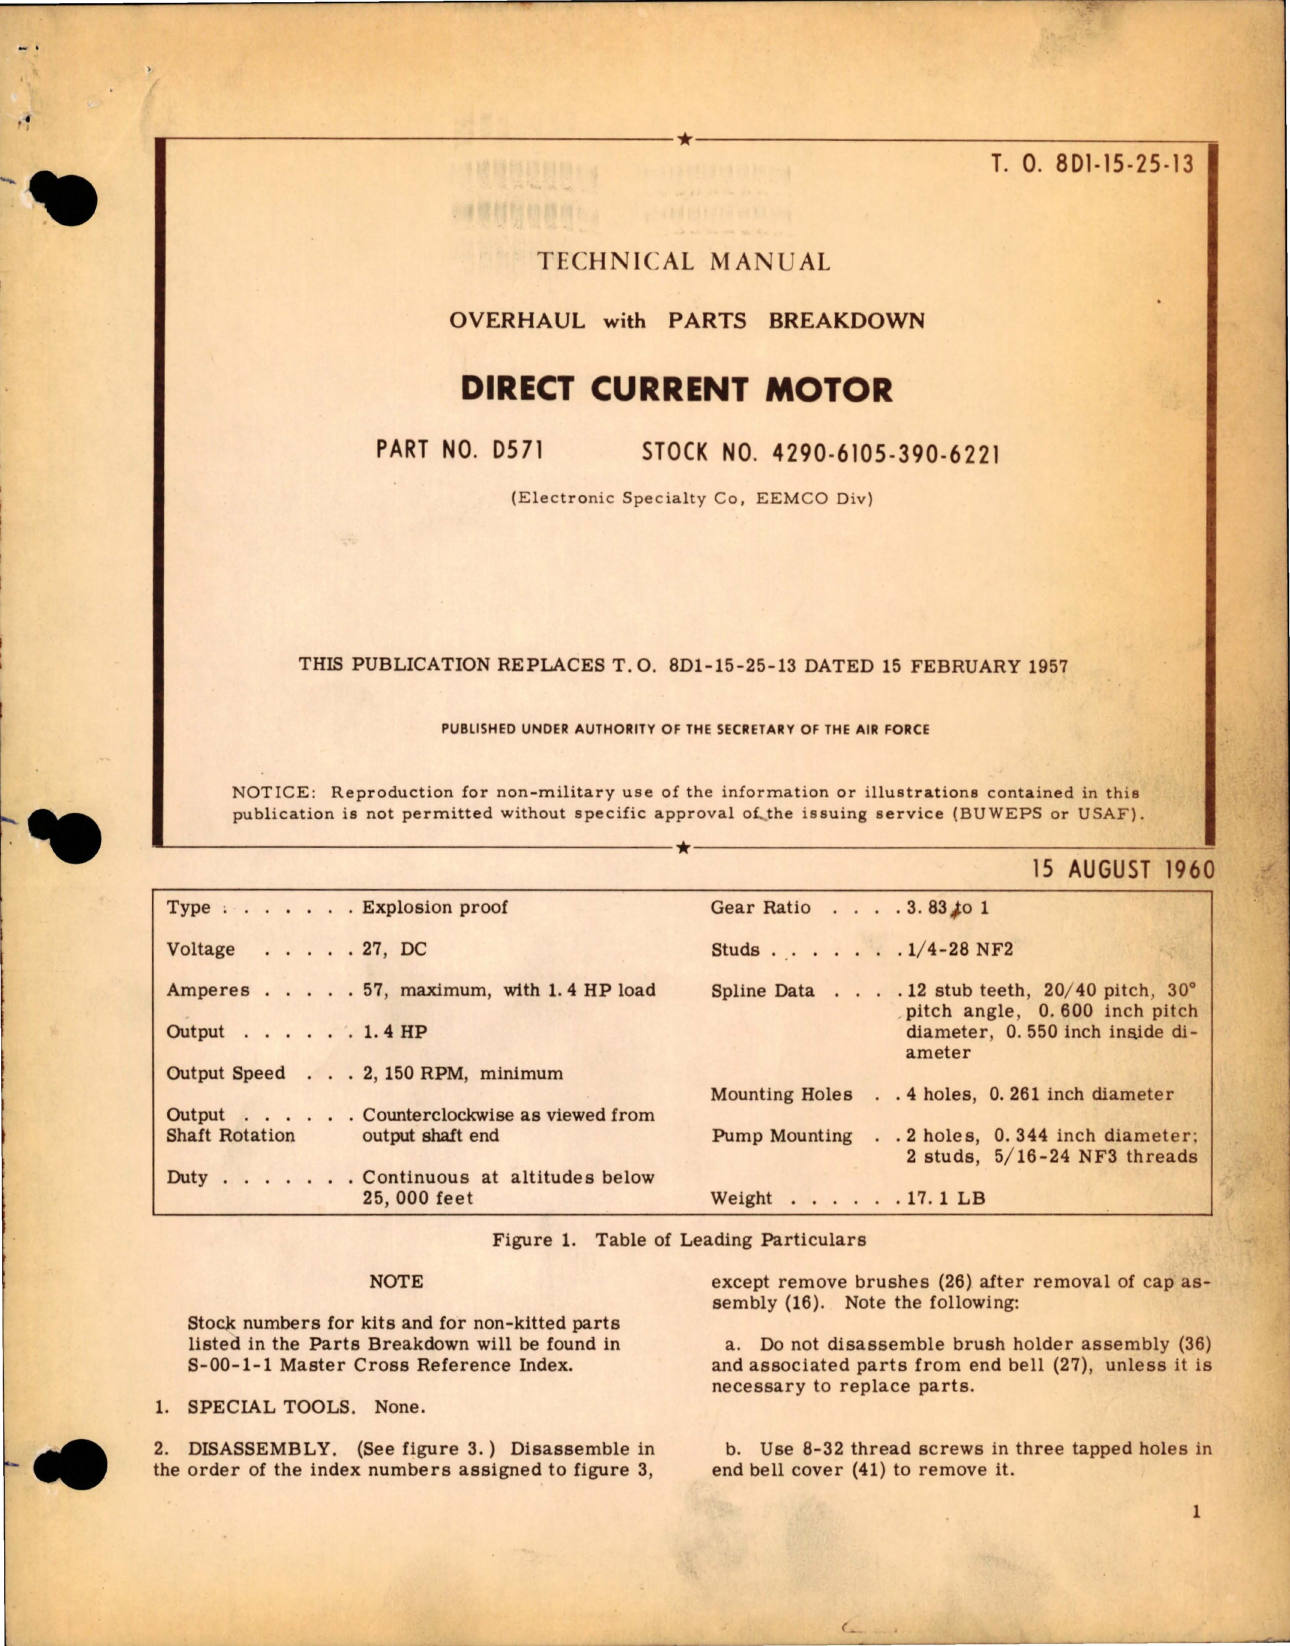 Sample page 1 from AirCorps Library document: Overhaul with Parts Breakdown for Direct Current Motor - Part D571 